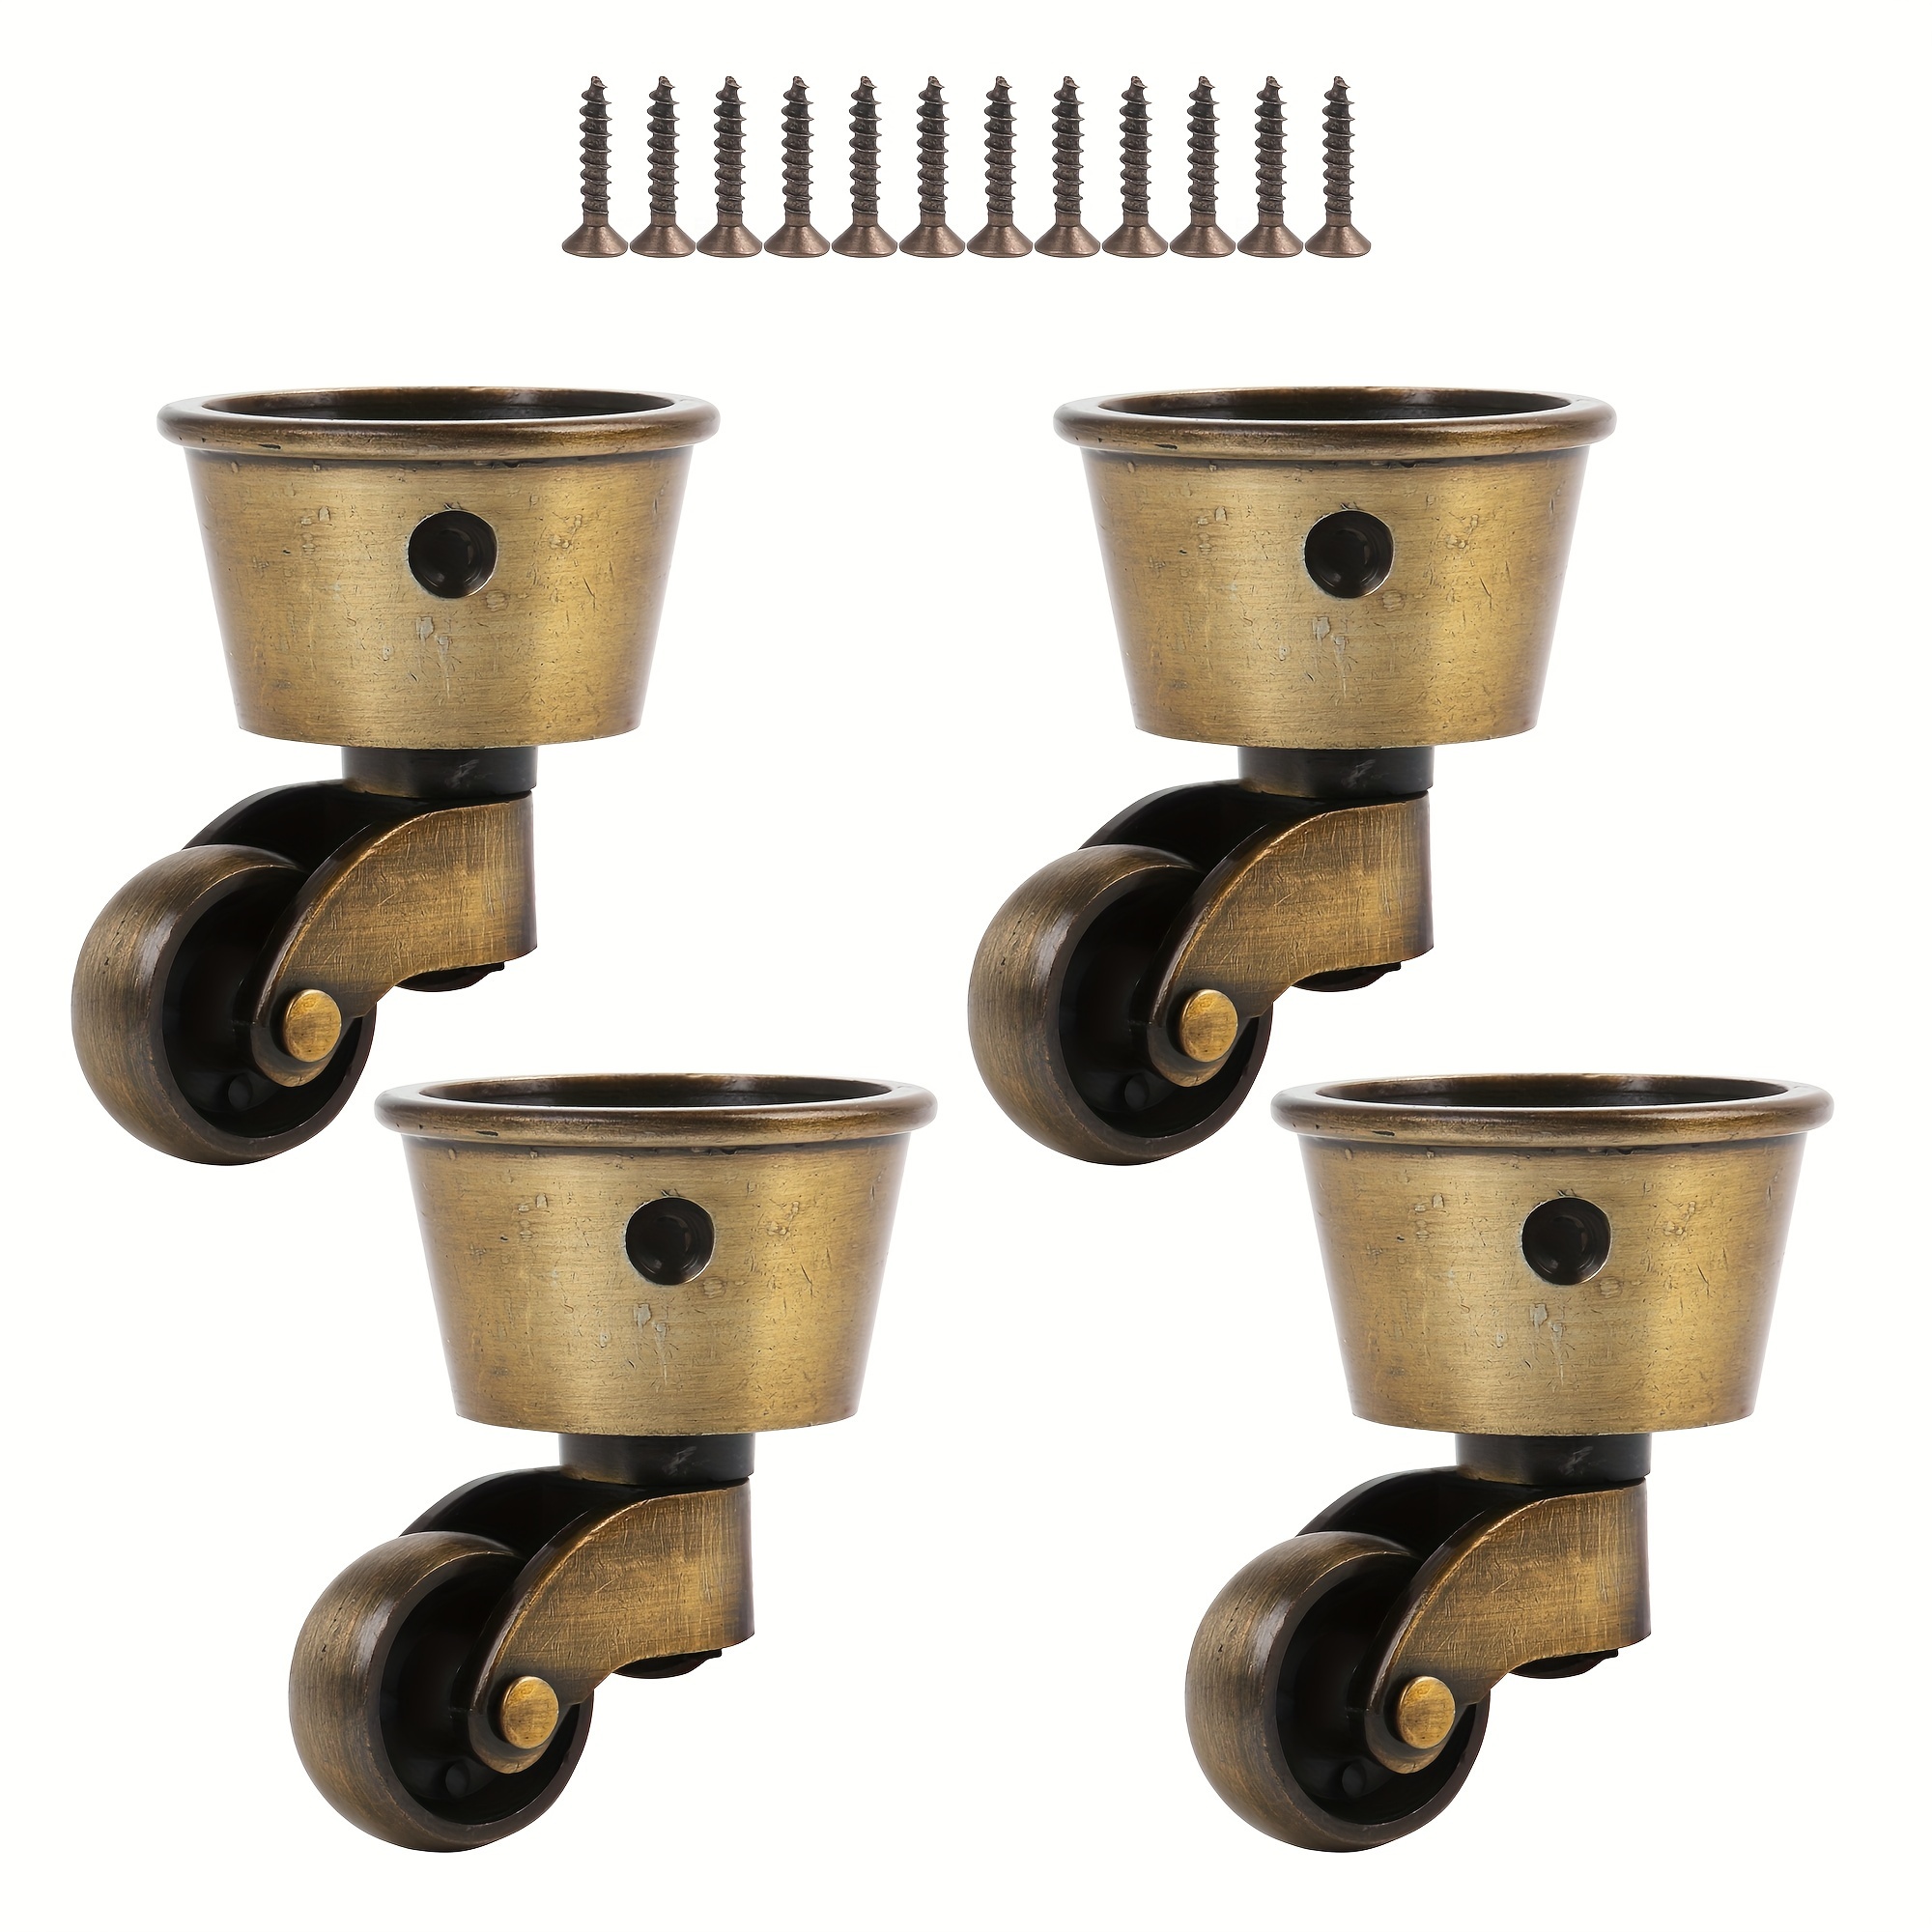 

4pcs Vintage Style Round Cup Casters, 45mm Metal Wheels